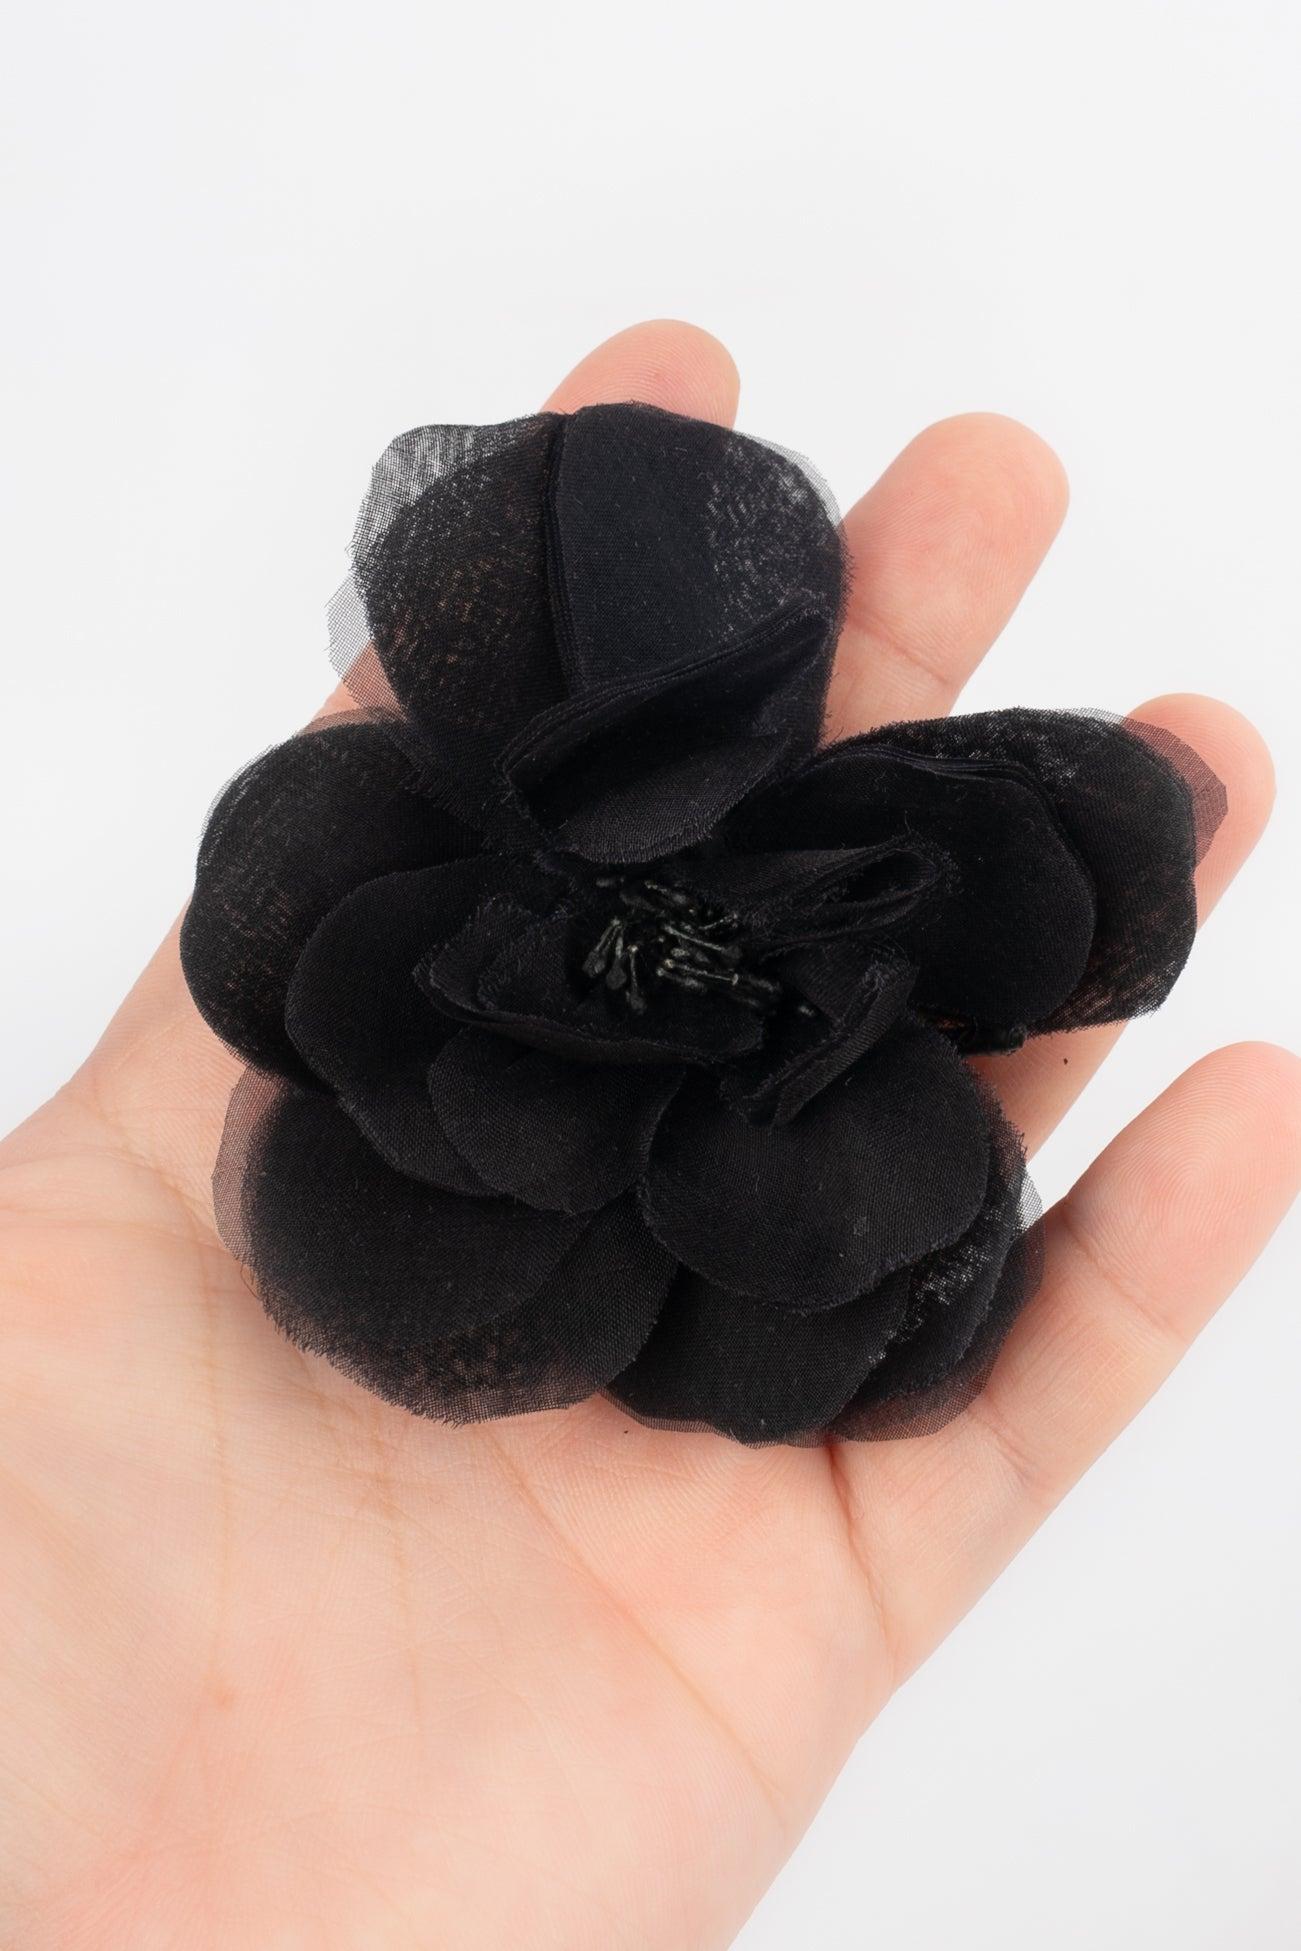 Chanel - Black camellia brooch. Not signed jewelry.
 
 Additional information: 
 Condition: Good condition
 Dimensions: Height: 9 cm
 
 Seller Reference: BRB127